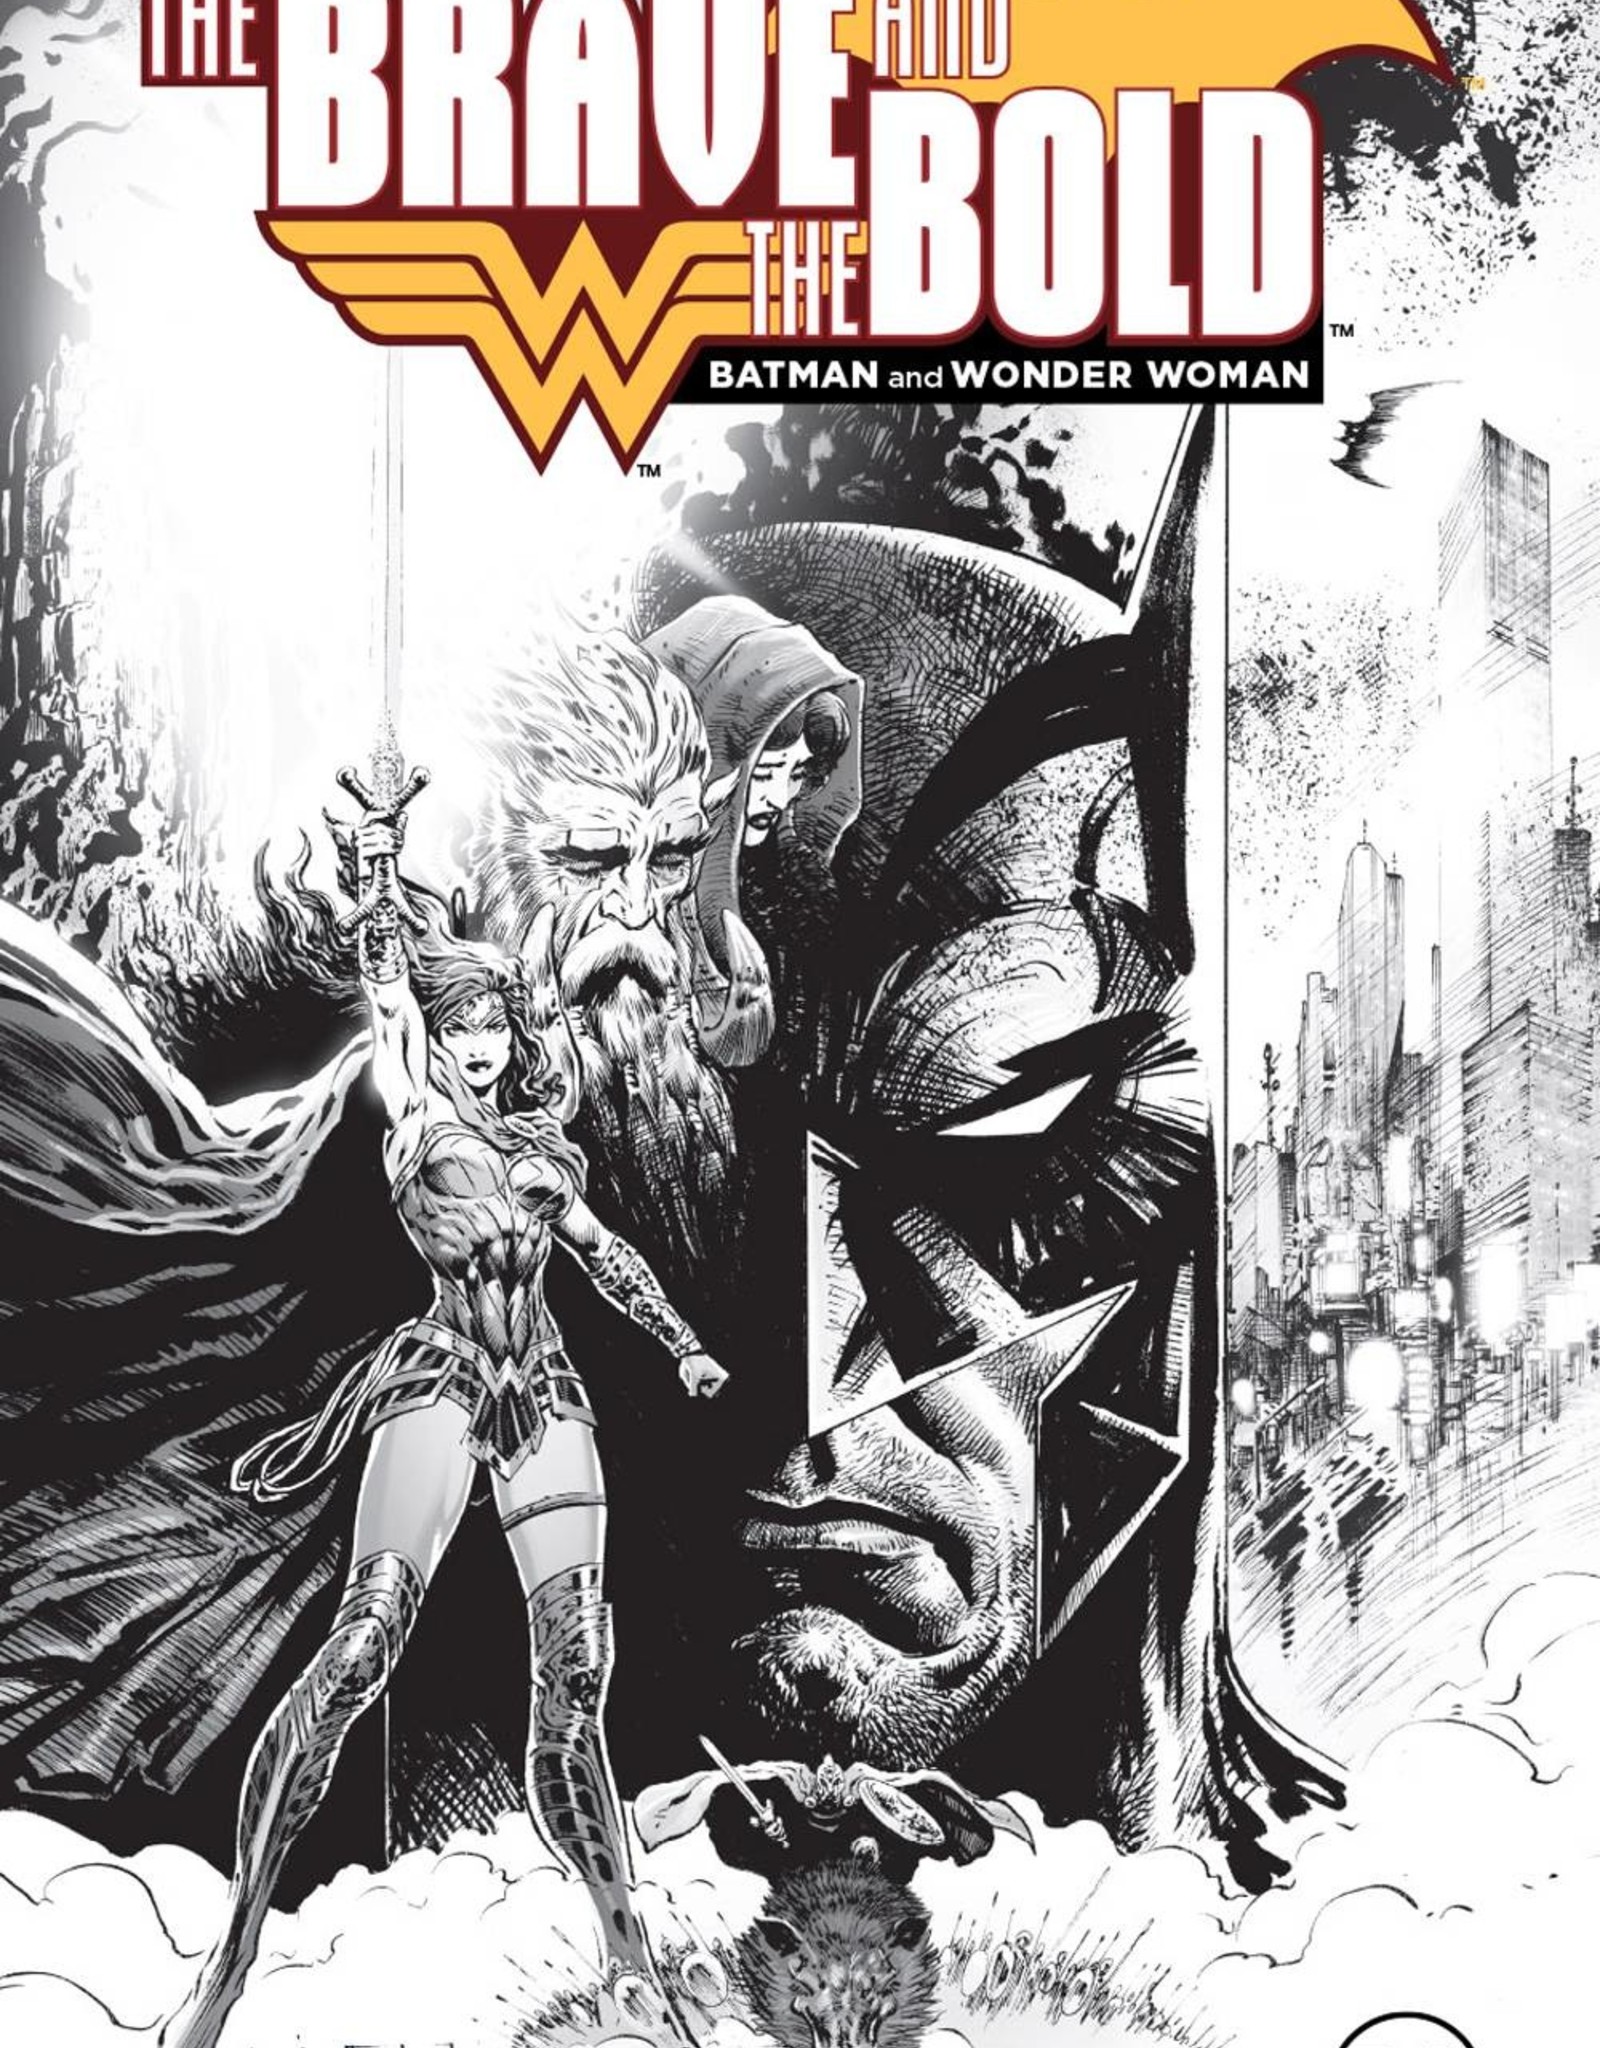 DC Comics LCSD 2018 Brave and the Bold Hardcover